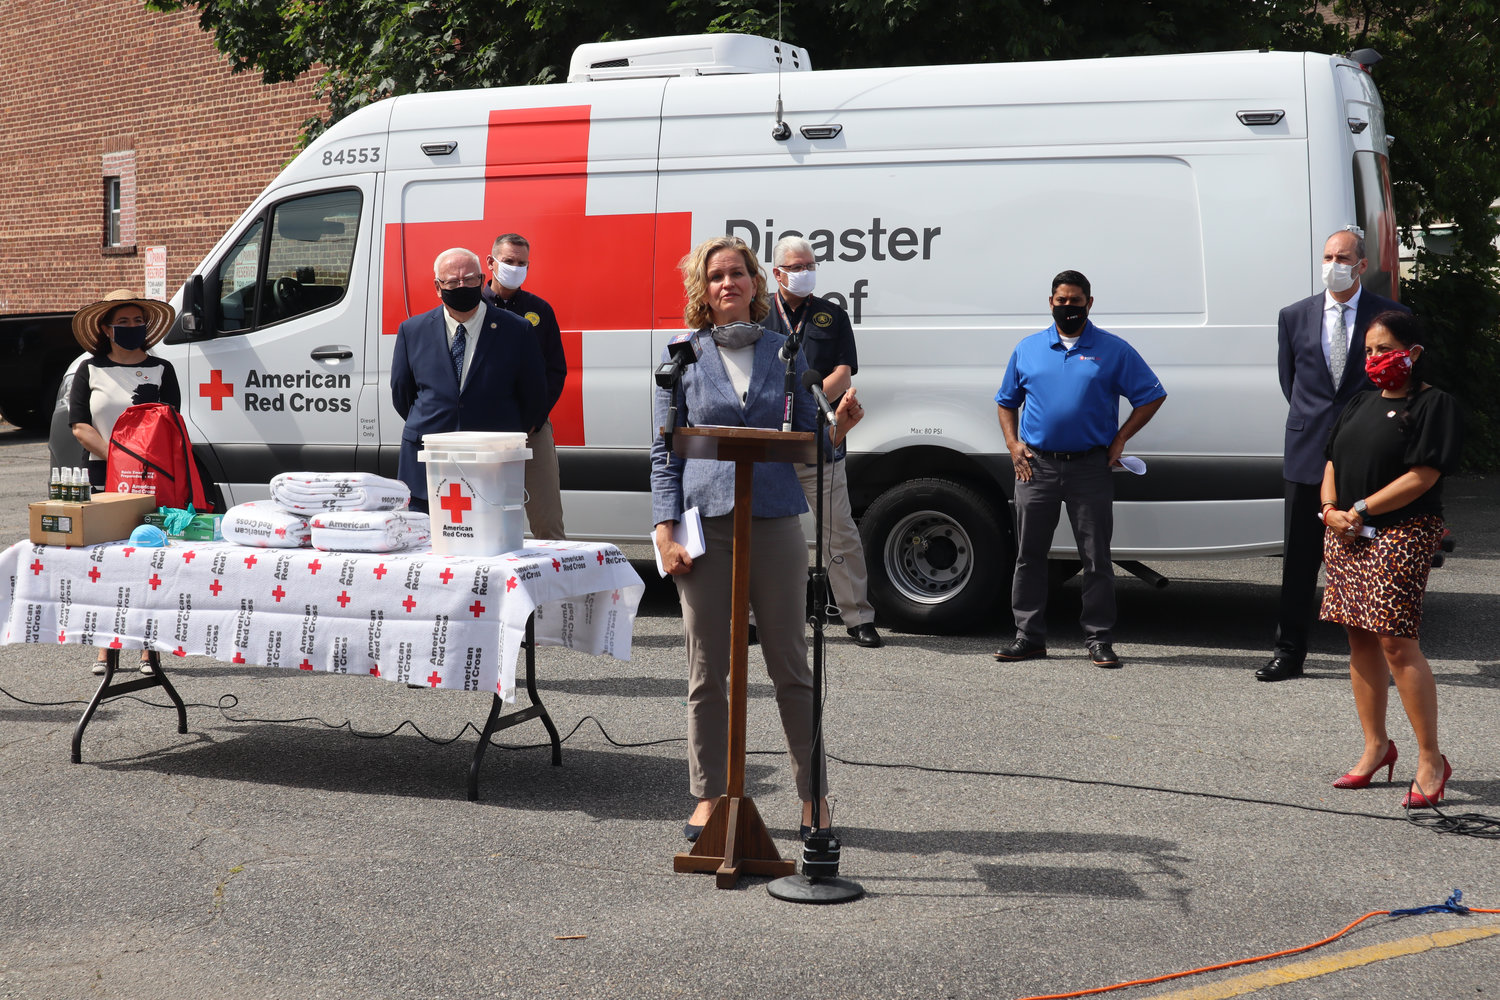 Nassau County Executive Laura Curran and other local officials spoke about ways individuals could prepare themselves for this hurricane season.